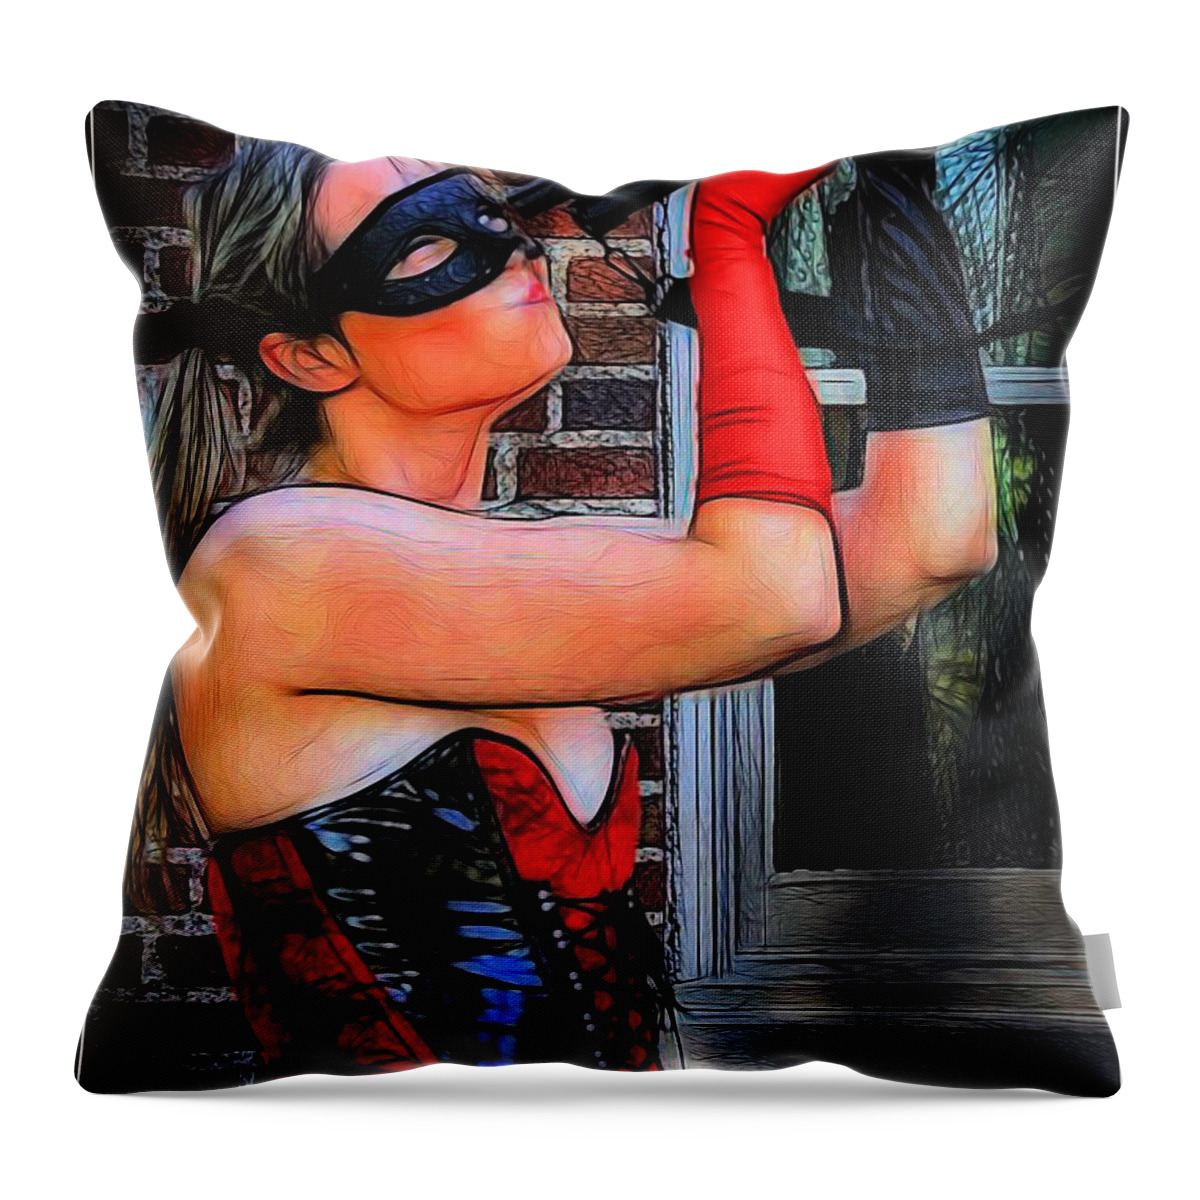 Fantasy Throw Pillow featuring the photograph A Harlequin Moment by Jon Volden